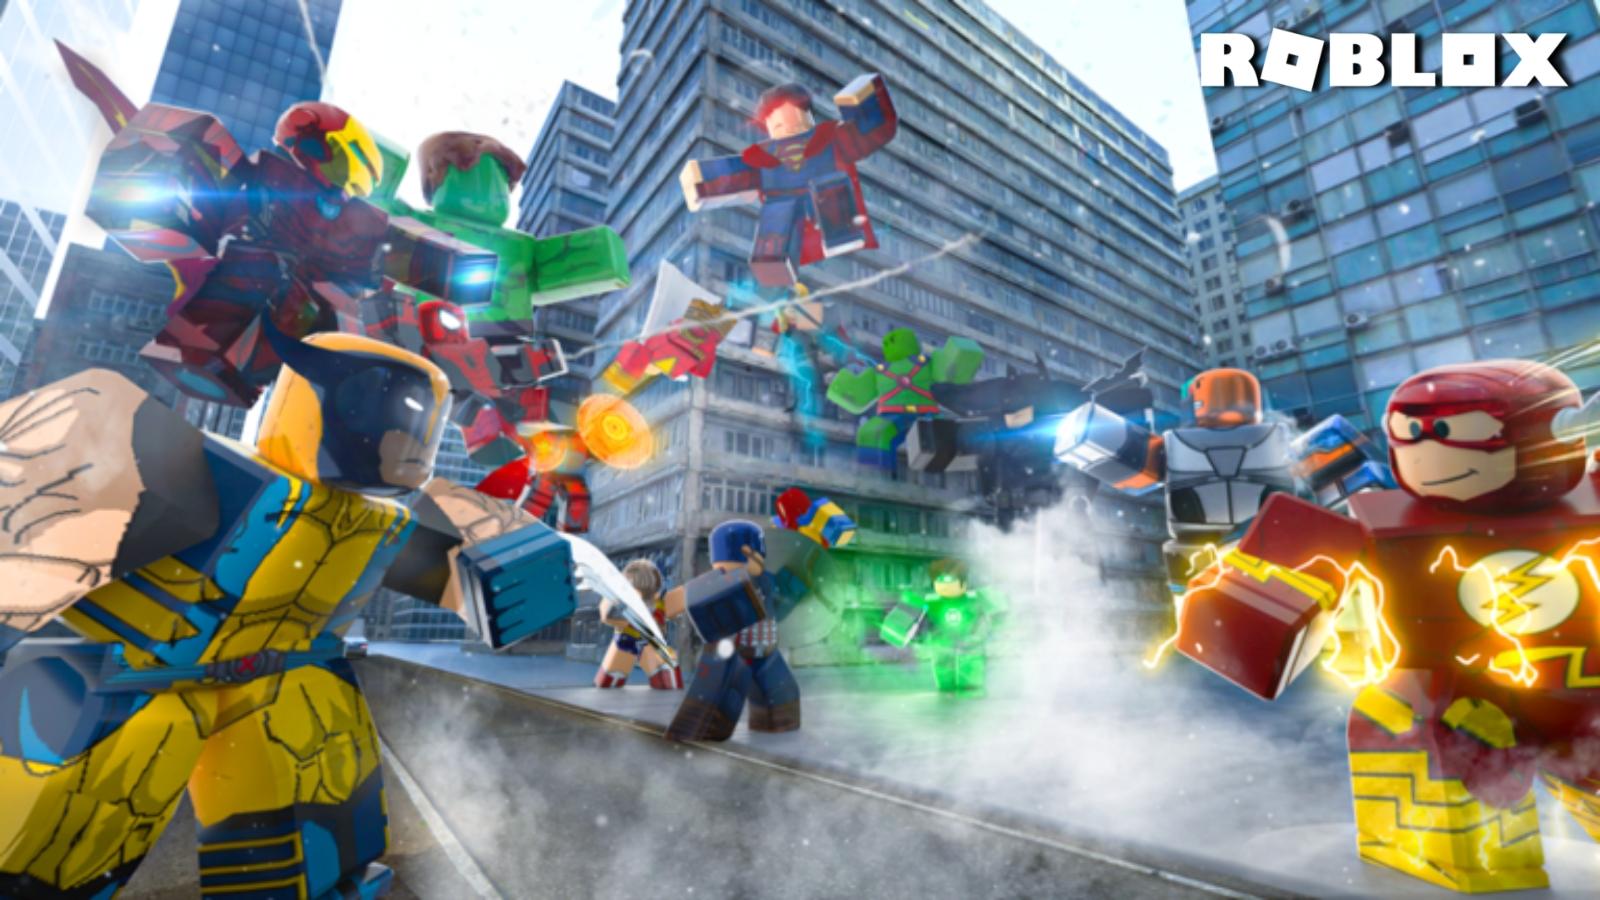 Roblox Hero and Villain Battlegrounds key art with Marvel and DC characters